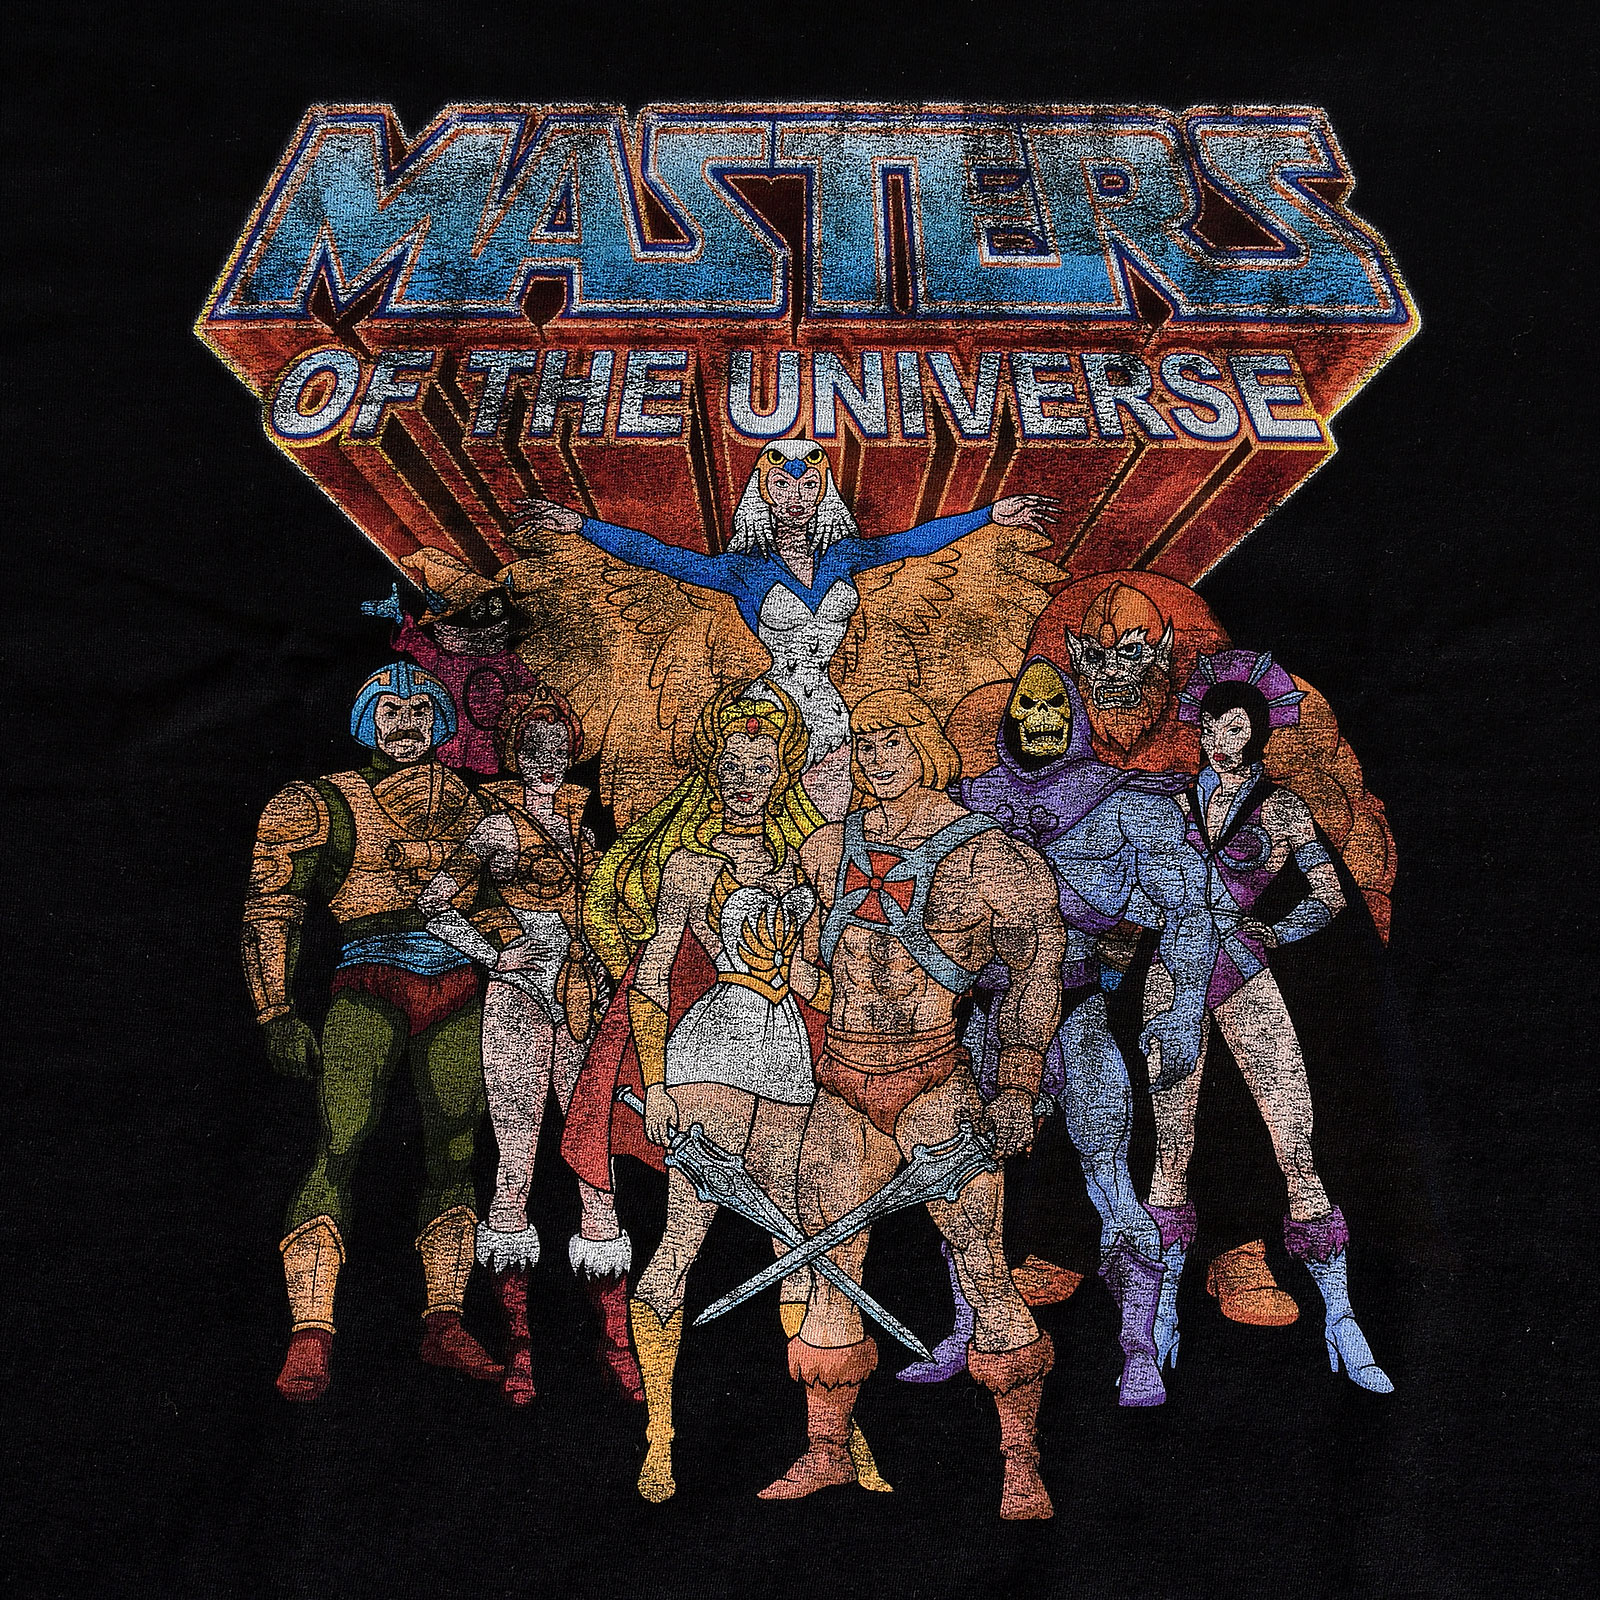 Masters of the Universe - Characters Distressed T-shirt zwart